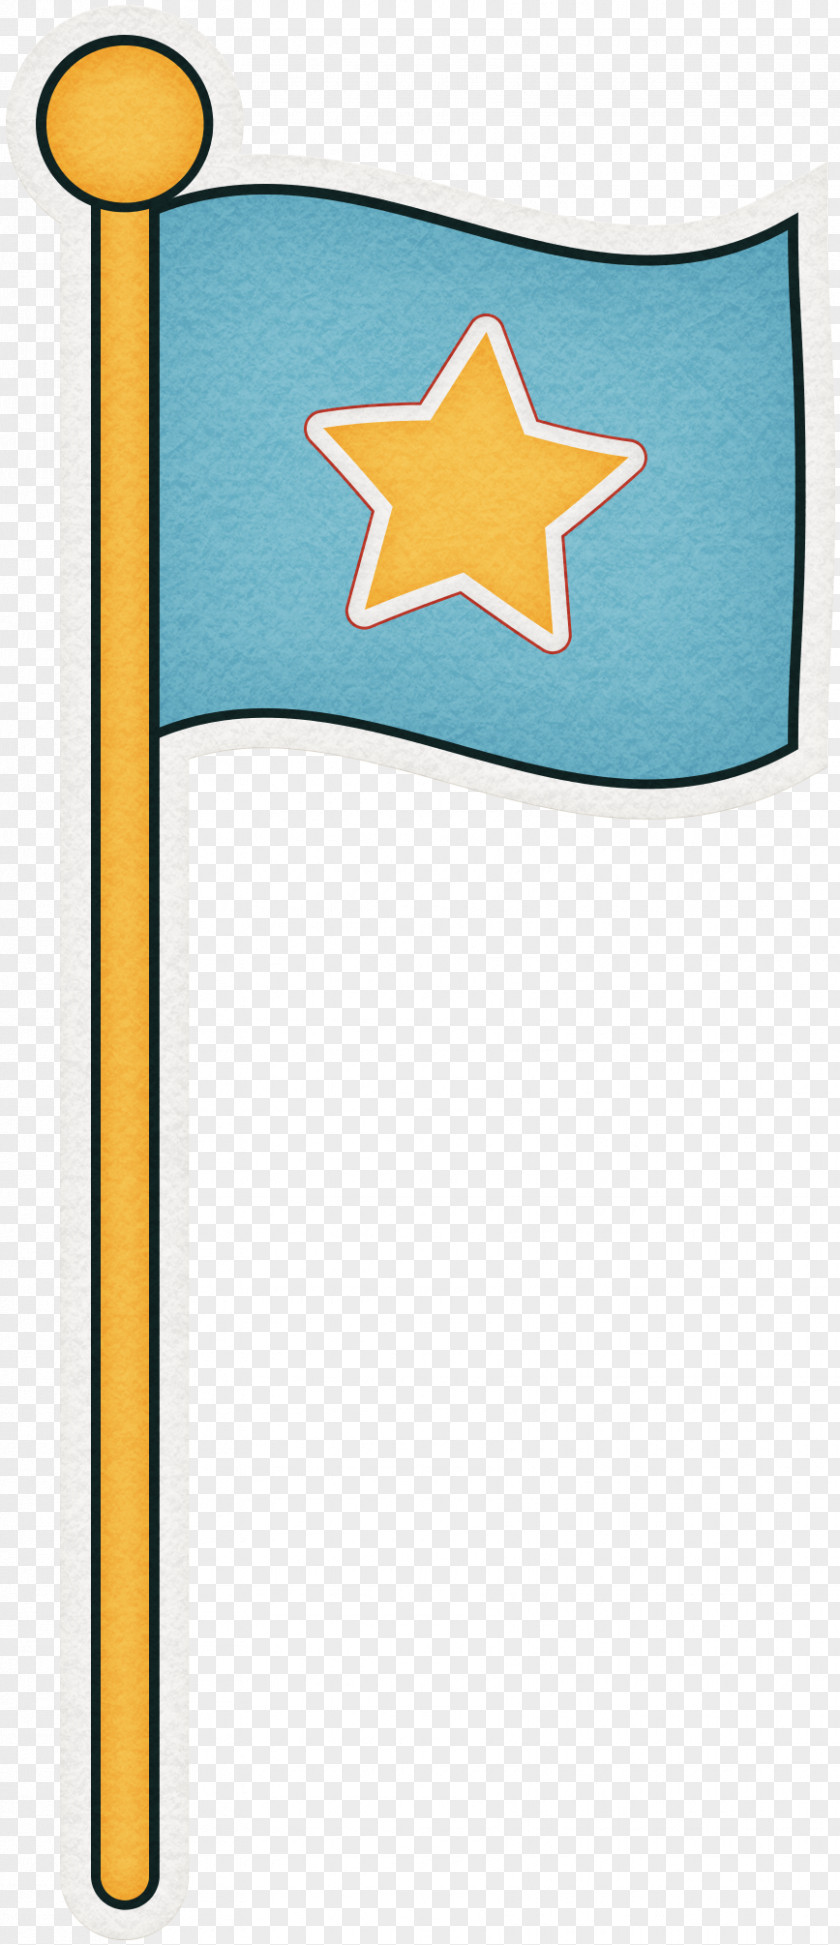 Blue Five-pointed Star Flag Cartoon PNG